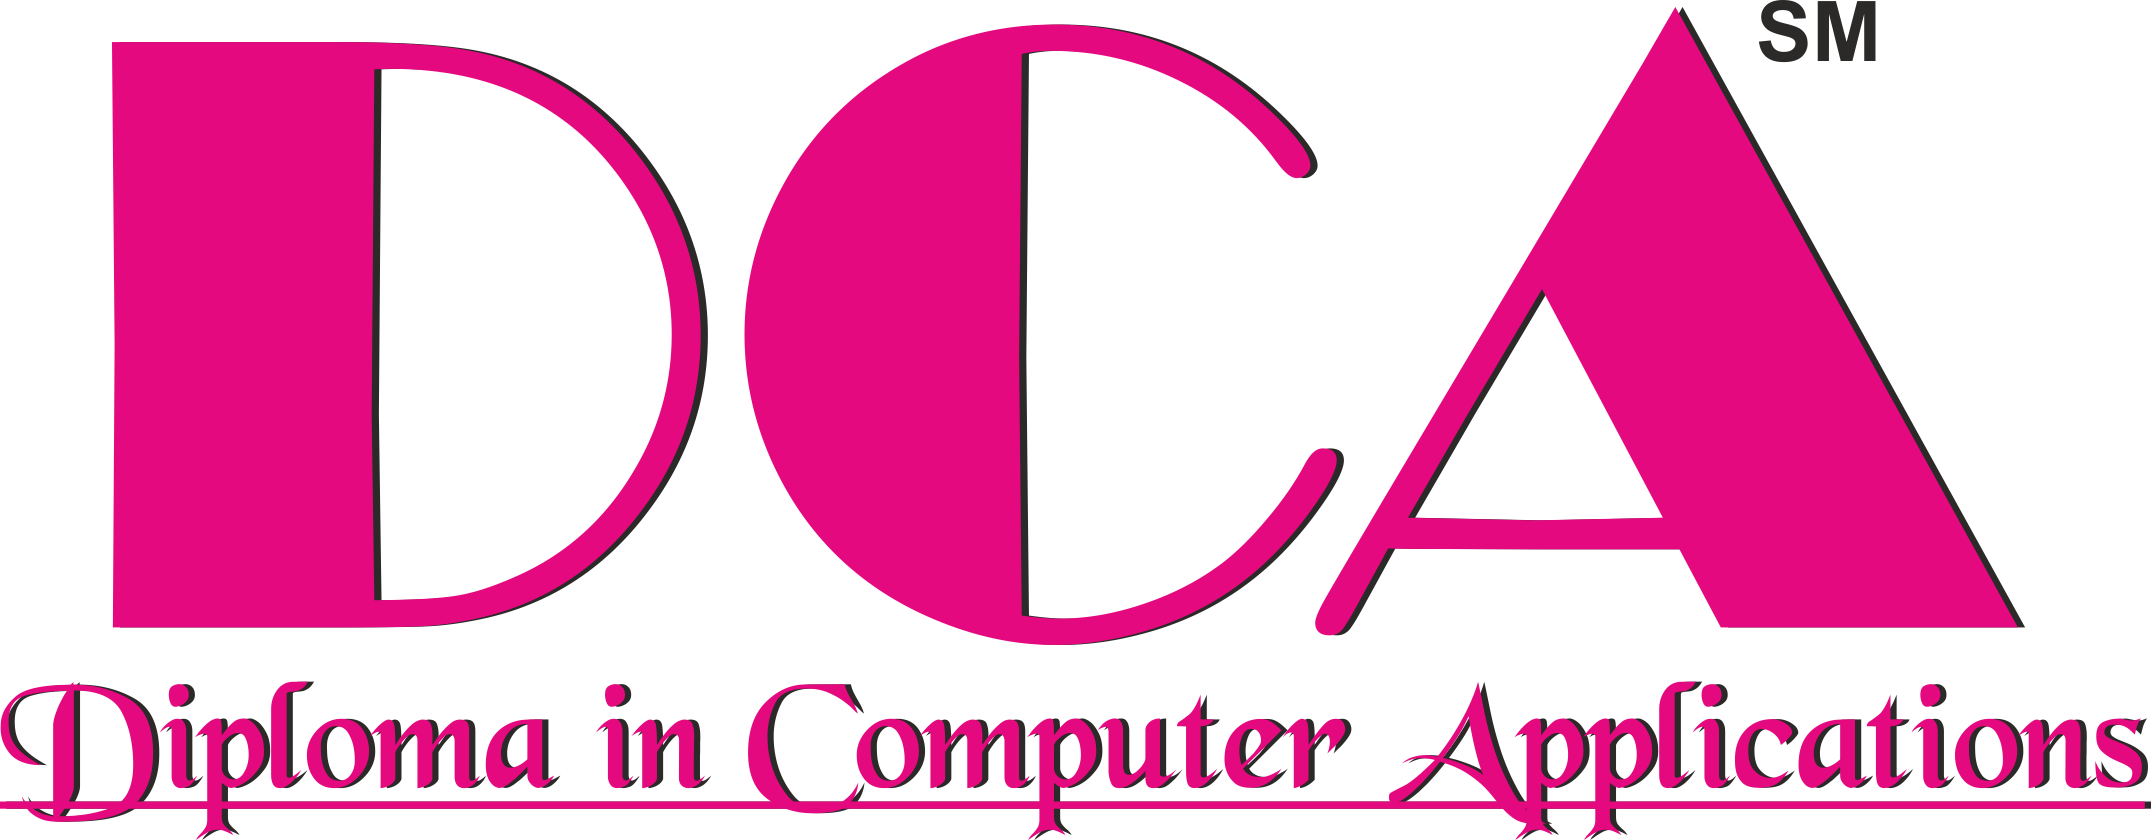 Top Diploma in Computer Application centre in andheri west